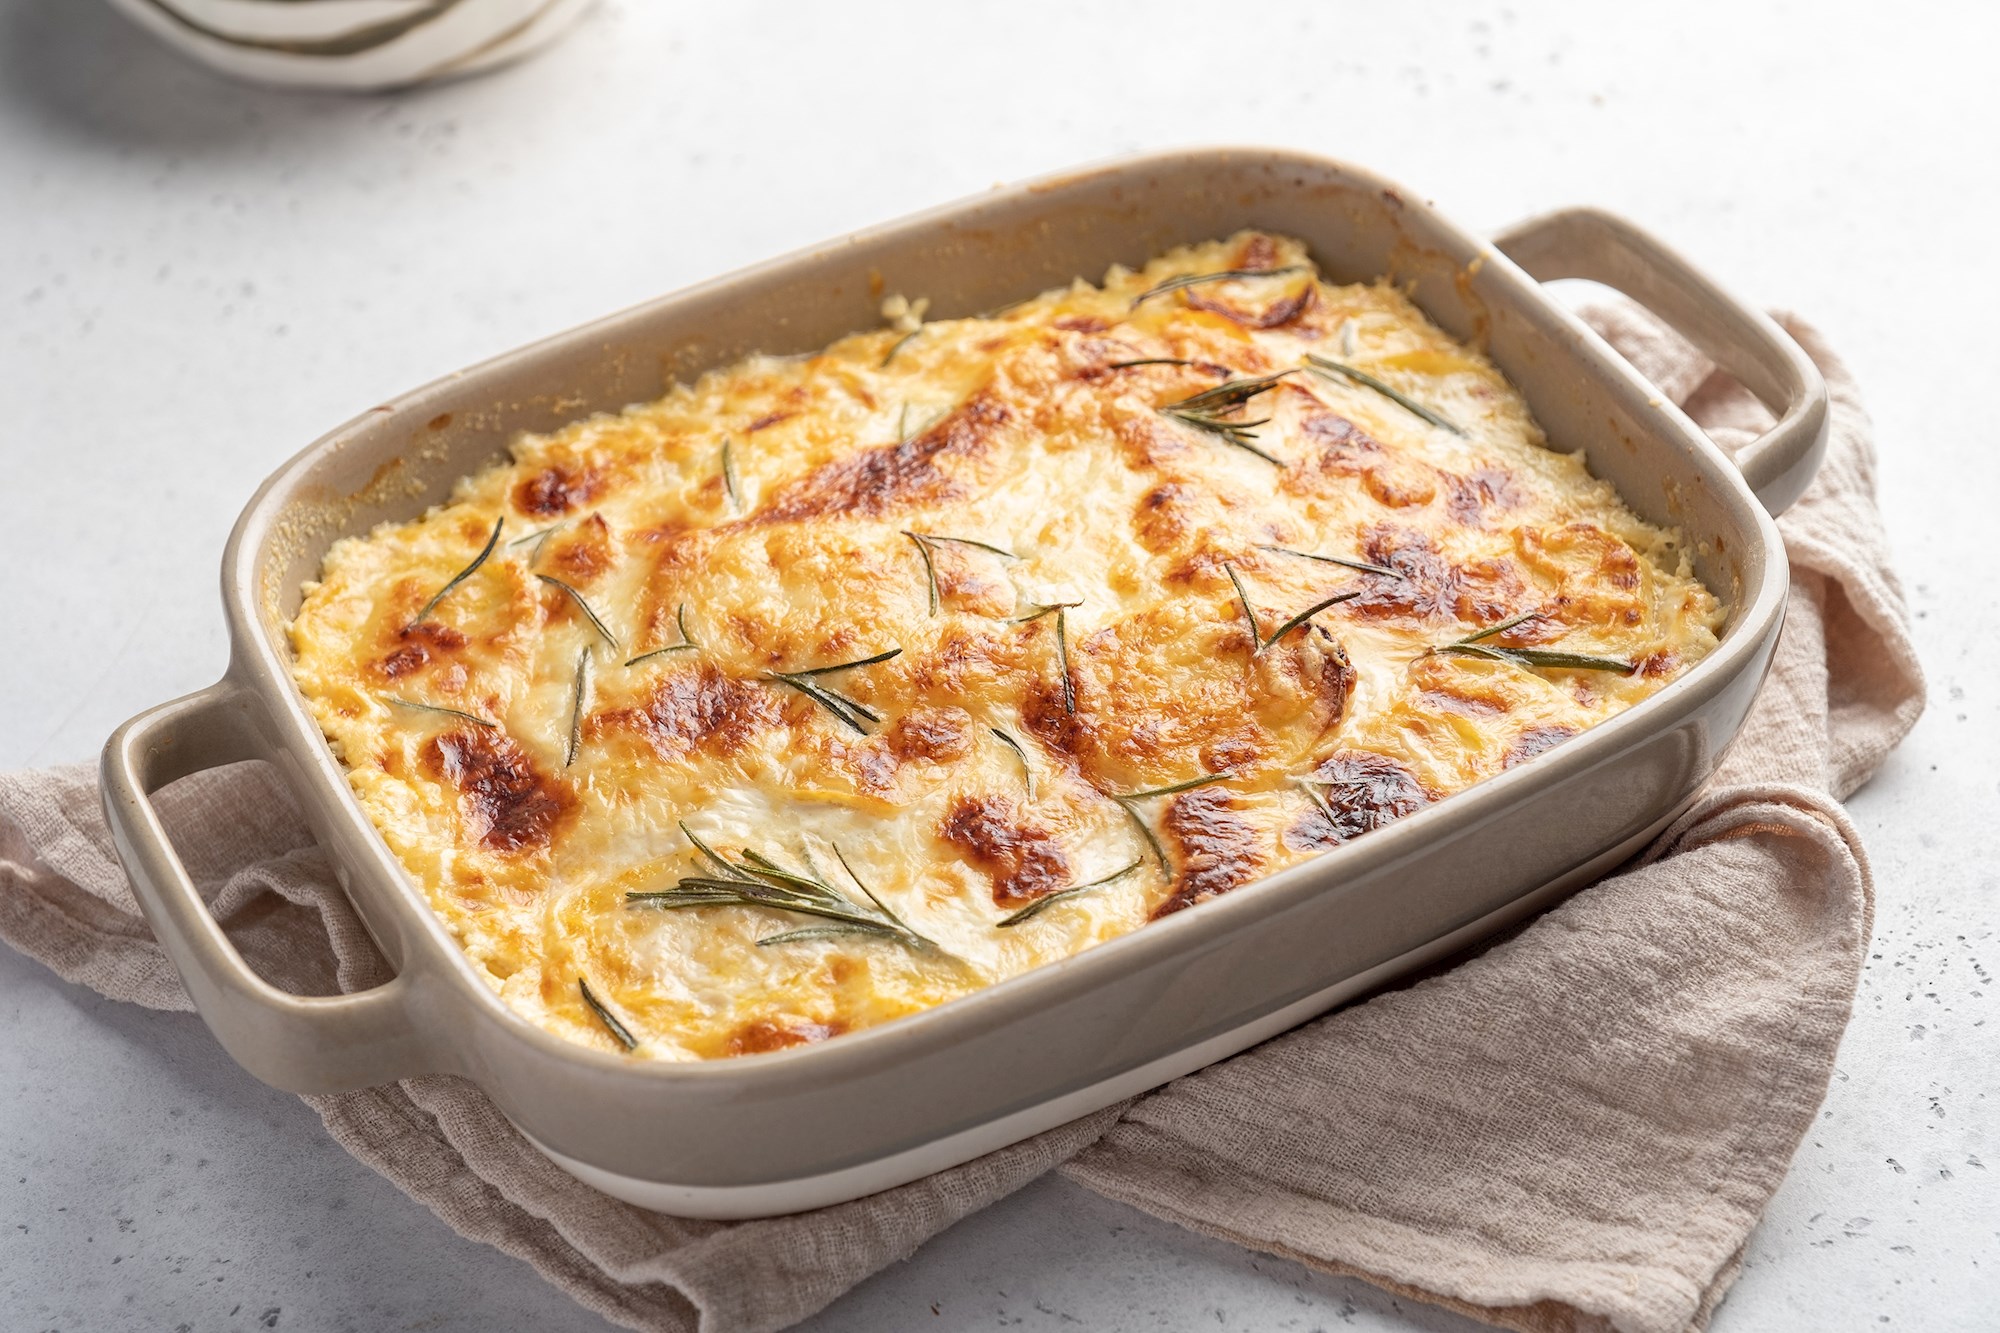 Where to Eat the Best Gratin Dauphinois in the World? | TasteAtlas